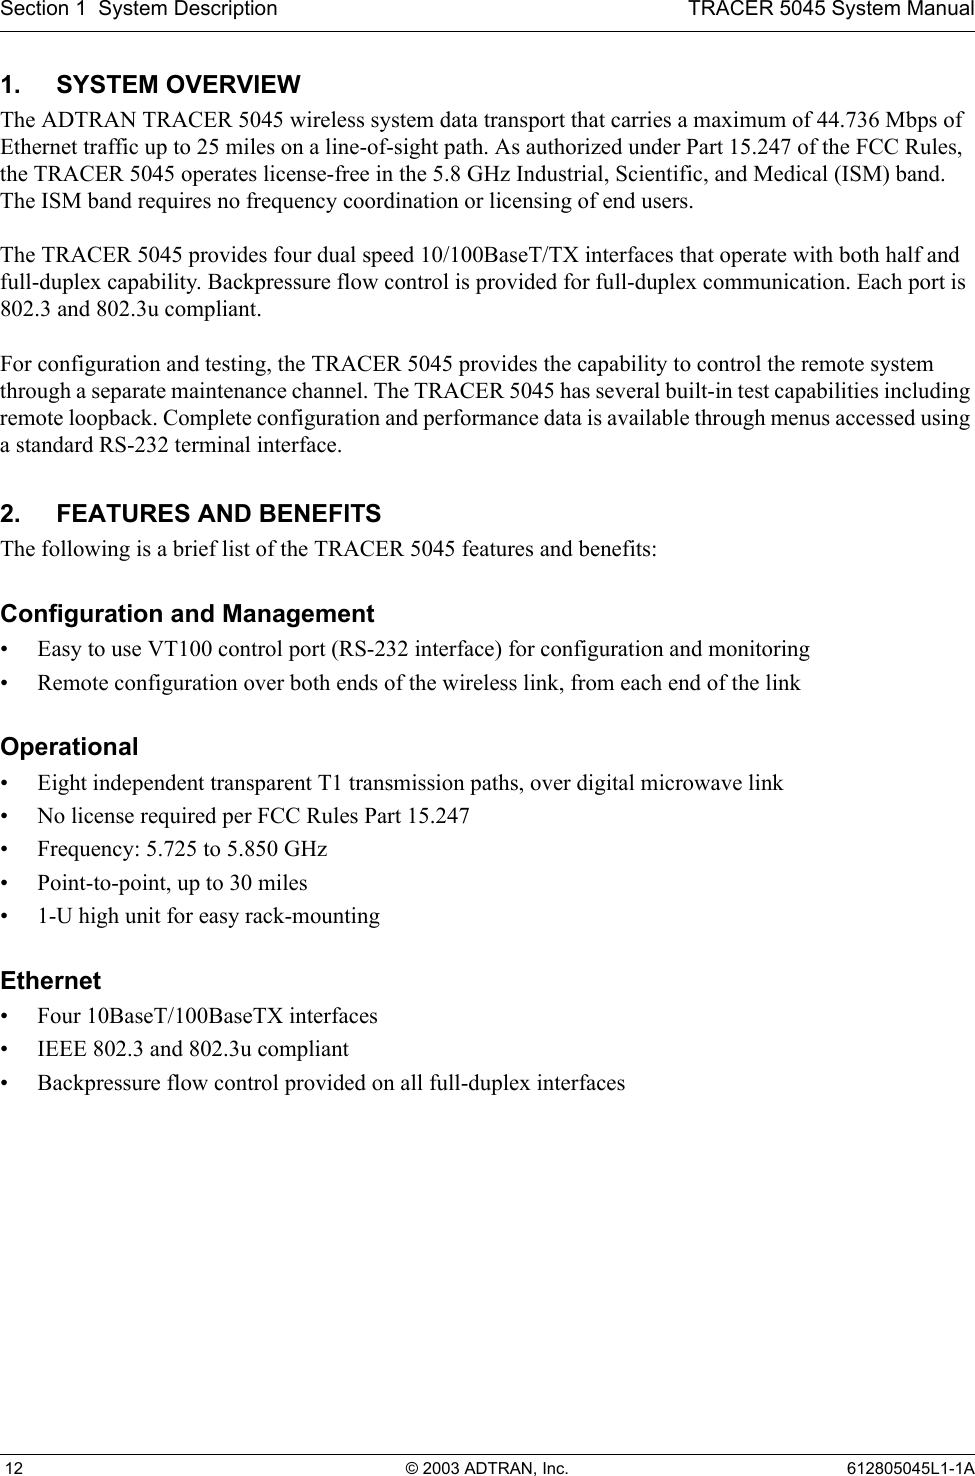 Section 1  System Description TRACER 5045 System Manual 12 © 2003 ADTRAN, Inc. 612805045L1-1A1. SYSTEM OVERVIEWThe ADTRAN TRACER 5045 wireless system data transport that carries a maximum of 44.736 Mbps of Ethernet traffic up to 25 miles on a line-of-sight path. As authorized under Part 15.247 of the FCC Rules, the TRACER 5045 operates license-free in the 5.8 GHz Industrial, Scientific, and Medical (ISM) band. The ISM band requires no frequency coordination or licensing of end users.The TRACER 5045 provides four dual speed 10/100BaseT/TX interfaces that operate with both half and full-duplex capability. Backpressure flow control is provided for full-duplex communication. Each port is 802.3 and 802.3u compliant.For configuration and testing, the TRACER 5045 provides the capability to control the remote system through a separate maintenance channel. The TRACER 5045 has several built-in test capabilities including remote loopback. Complete configuration and performance data is available through menus accessed using a standard RS-232 terminal interface.2. FEATURES AND BENEFITSThe following is a brief list of the TRACER 5045 features and benefits:Configuration and Management• Easy to use VT100 control port (RS-232 interface) for configuration and monitoring• Remote configuration over both ends of the wireless link, from each end of the linkOperational• Eight independent transparent T1 transmission paths, over digital microwave link• No license required per FCC Rules Part 15.247• Frequency: 5.725 to 5.850 GHz• Point-to-point, up to 30 miles• 1-U high unit for easy rack-mountingEthernet• Four 10BaseT/100BaseTX interfaces• IEEE 802.3 and 802.3u compliant• Backpressure flow control provided on all full-duplex interfaces